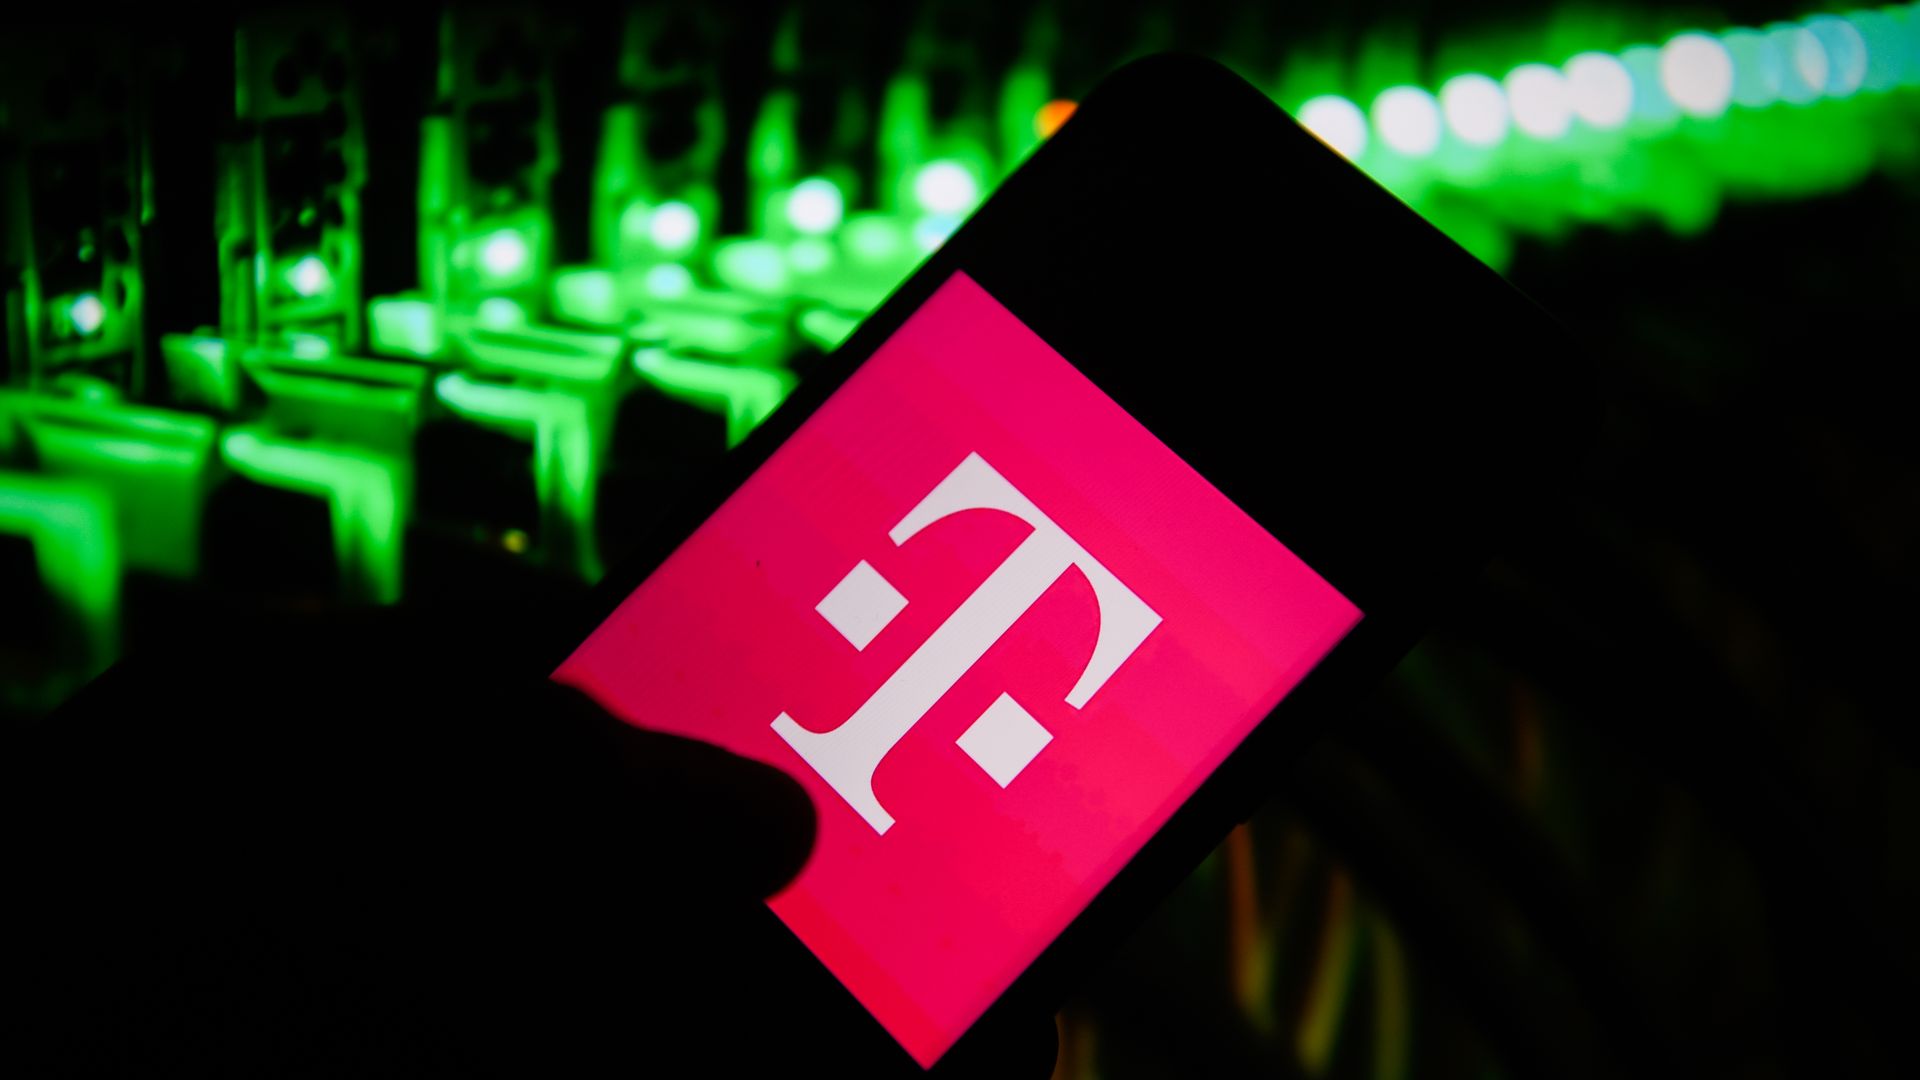 The t mobile on a logo on a phone in the foreground. A dark background.